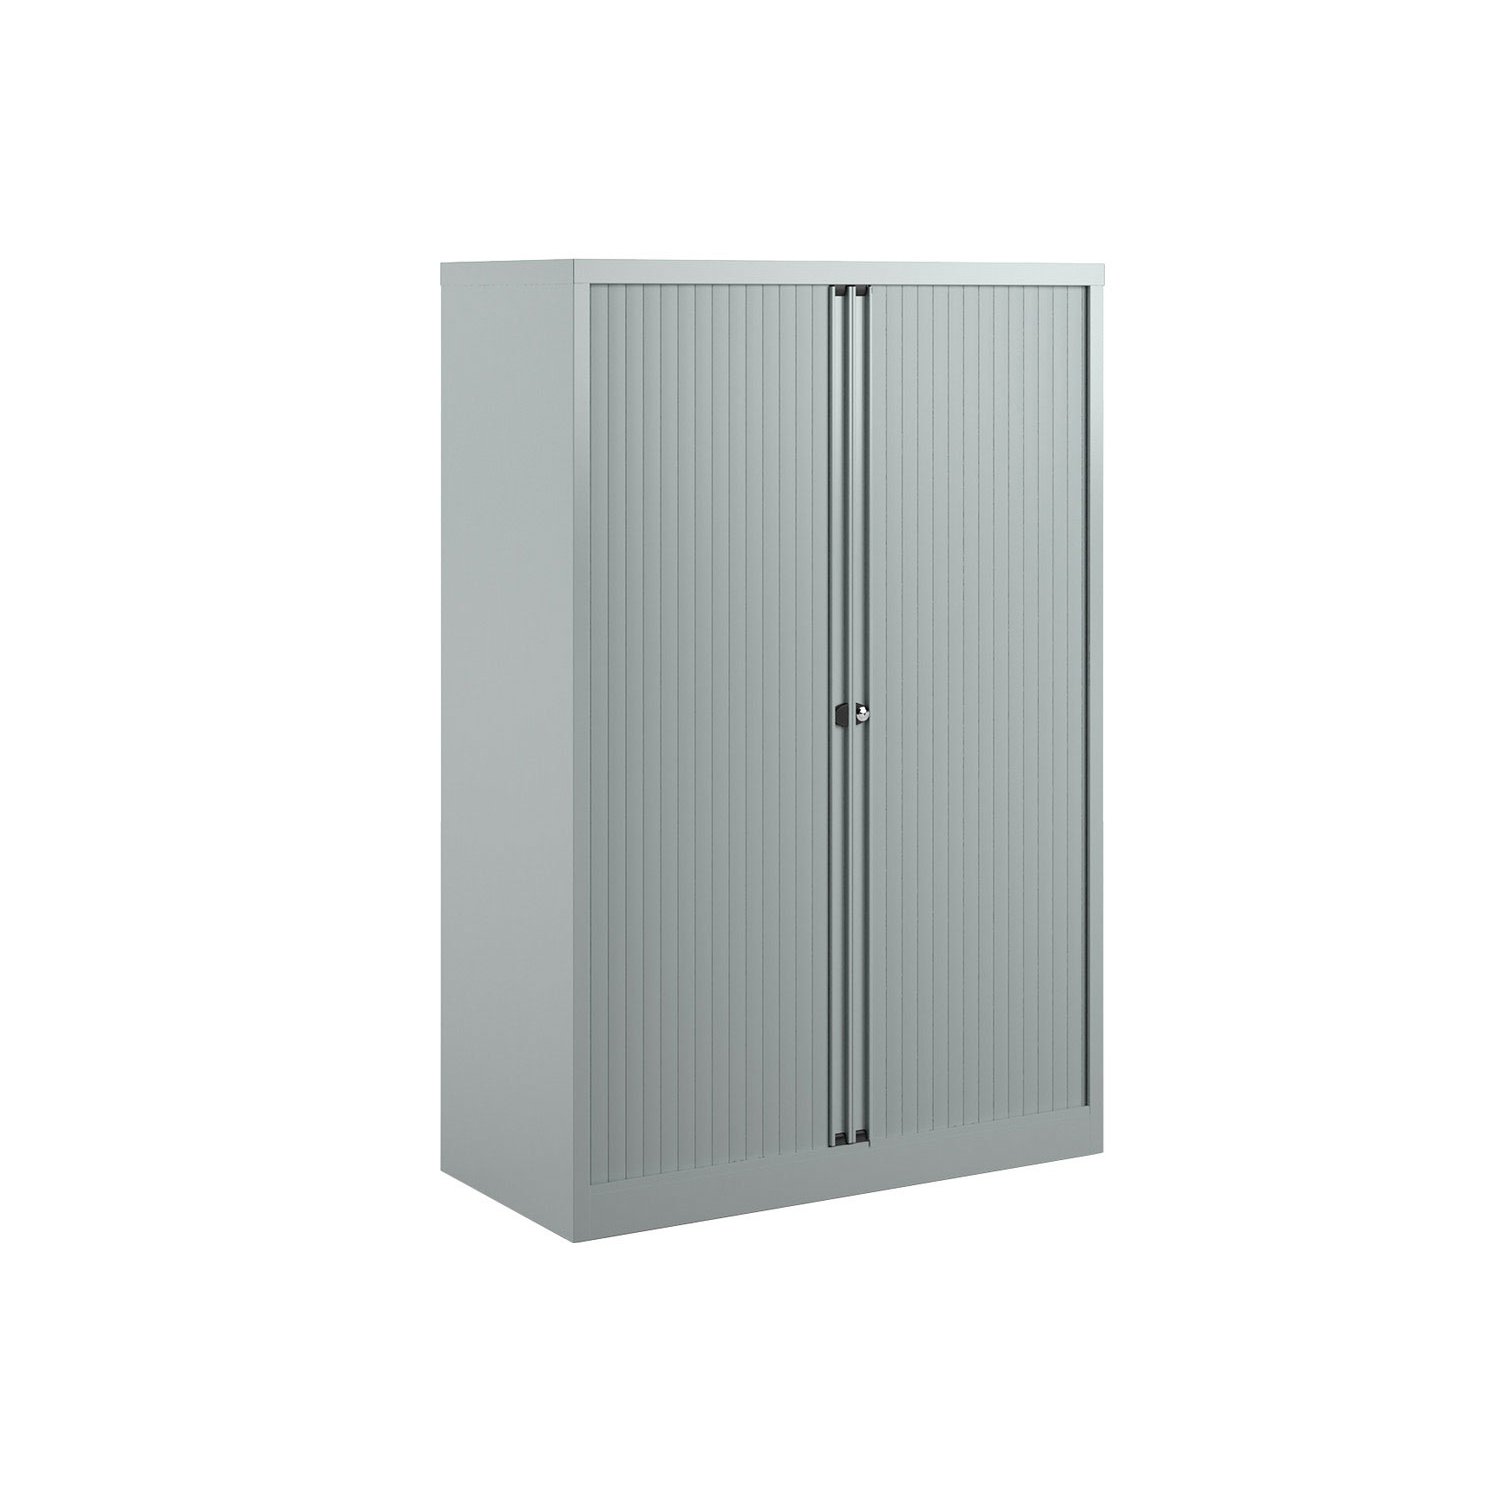 Bisley Economy Tambour Cupboard, 100wx47dx159h (cm), Silver